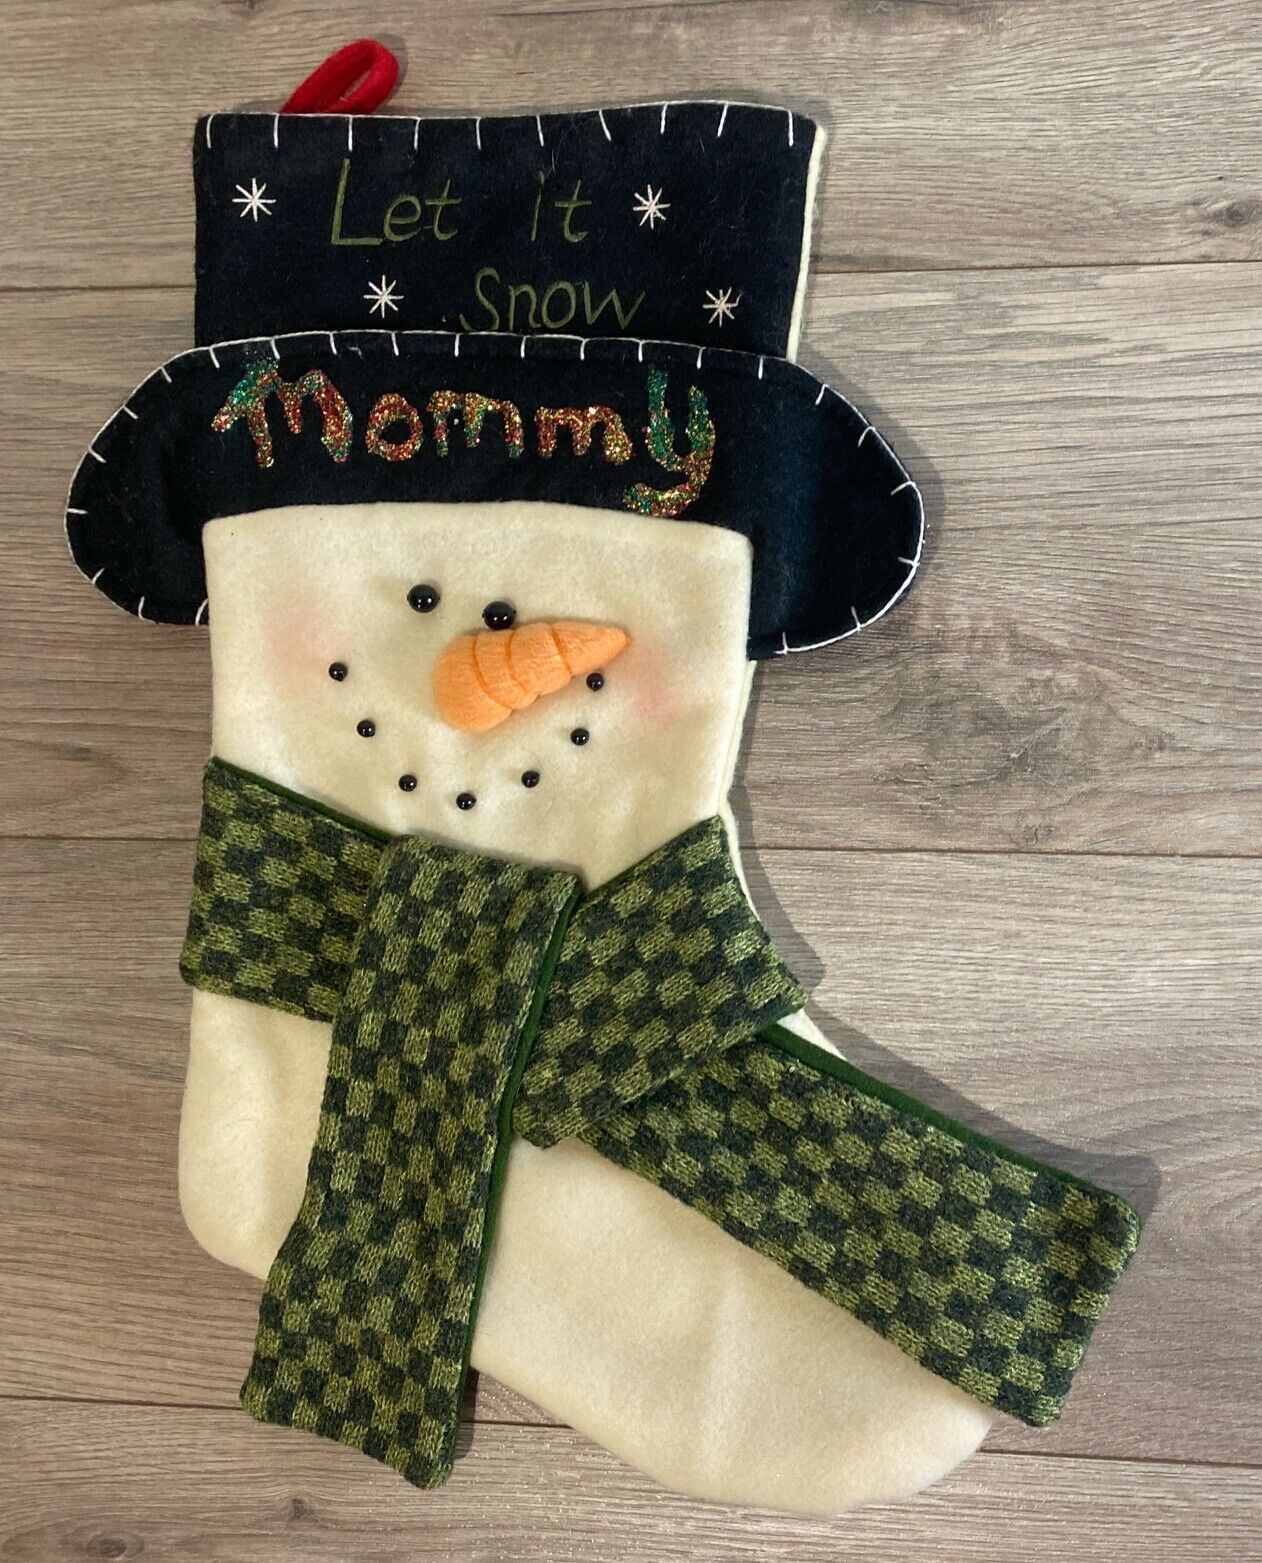 Prima Snowman Felt TopHat Christmas Stocking 20” Let It Snow Mommy